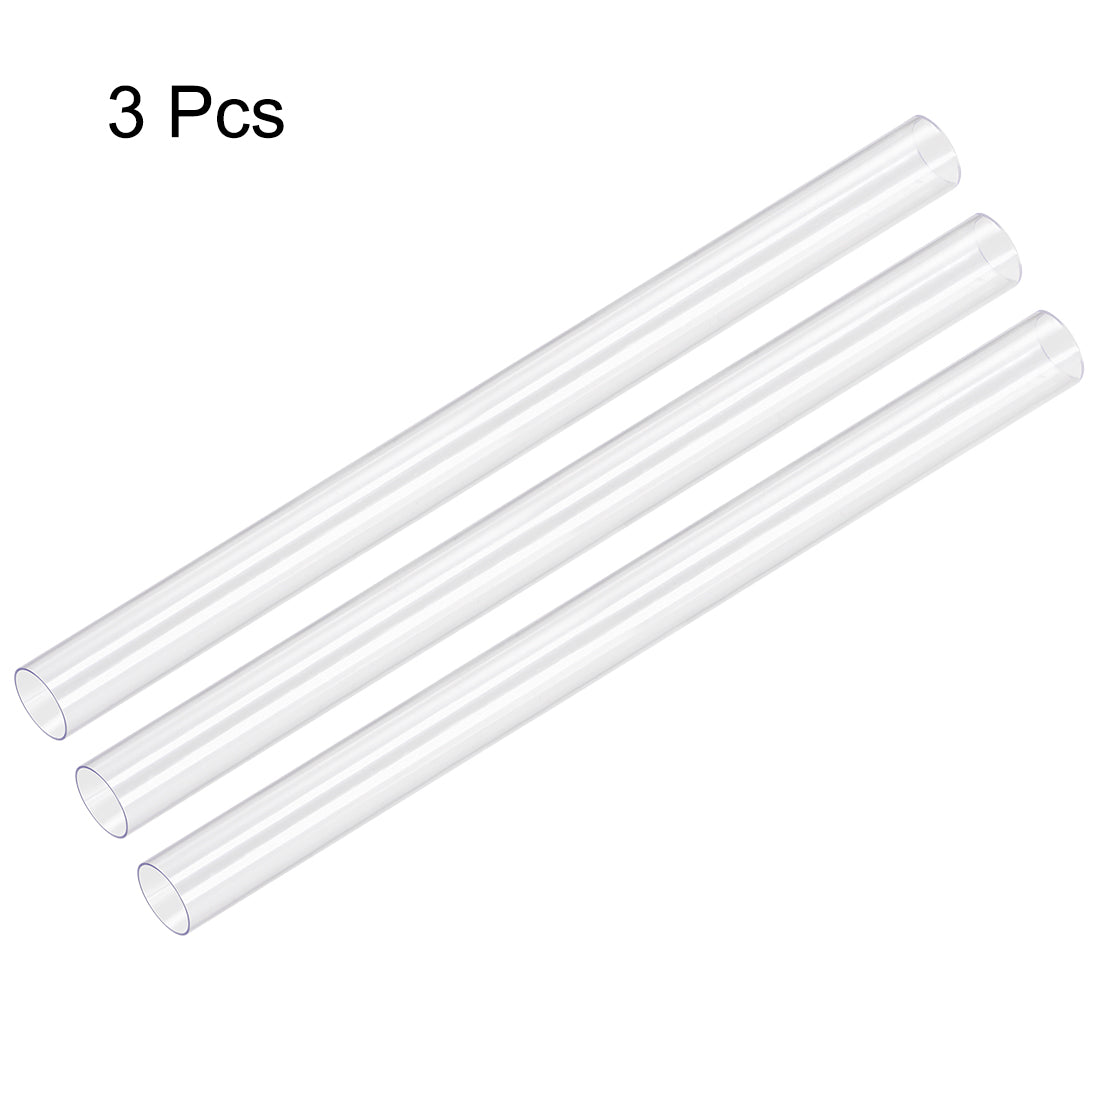 uxcell Uxcell PVC Rigid Round Tubing,Clear,23mm ID x 25mm OD,0.5M/1.64Ft Length,3pcs